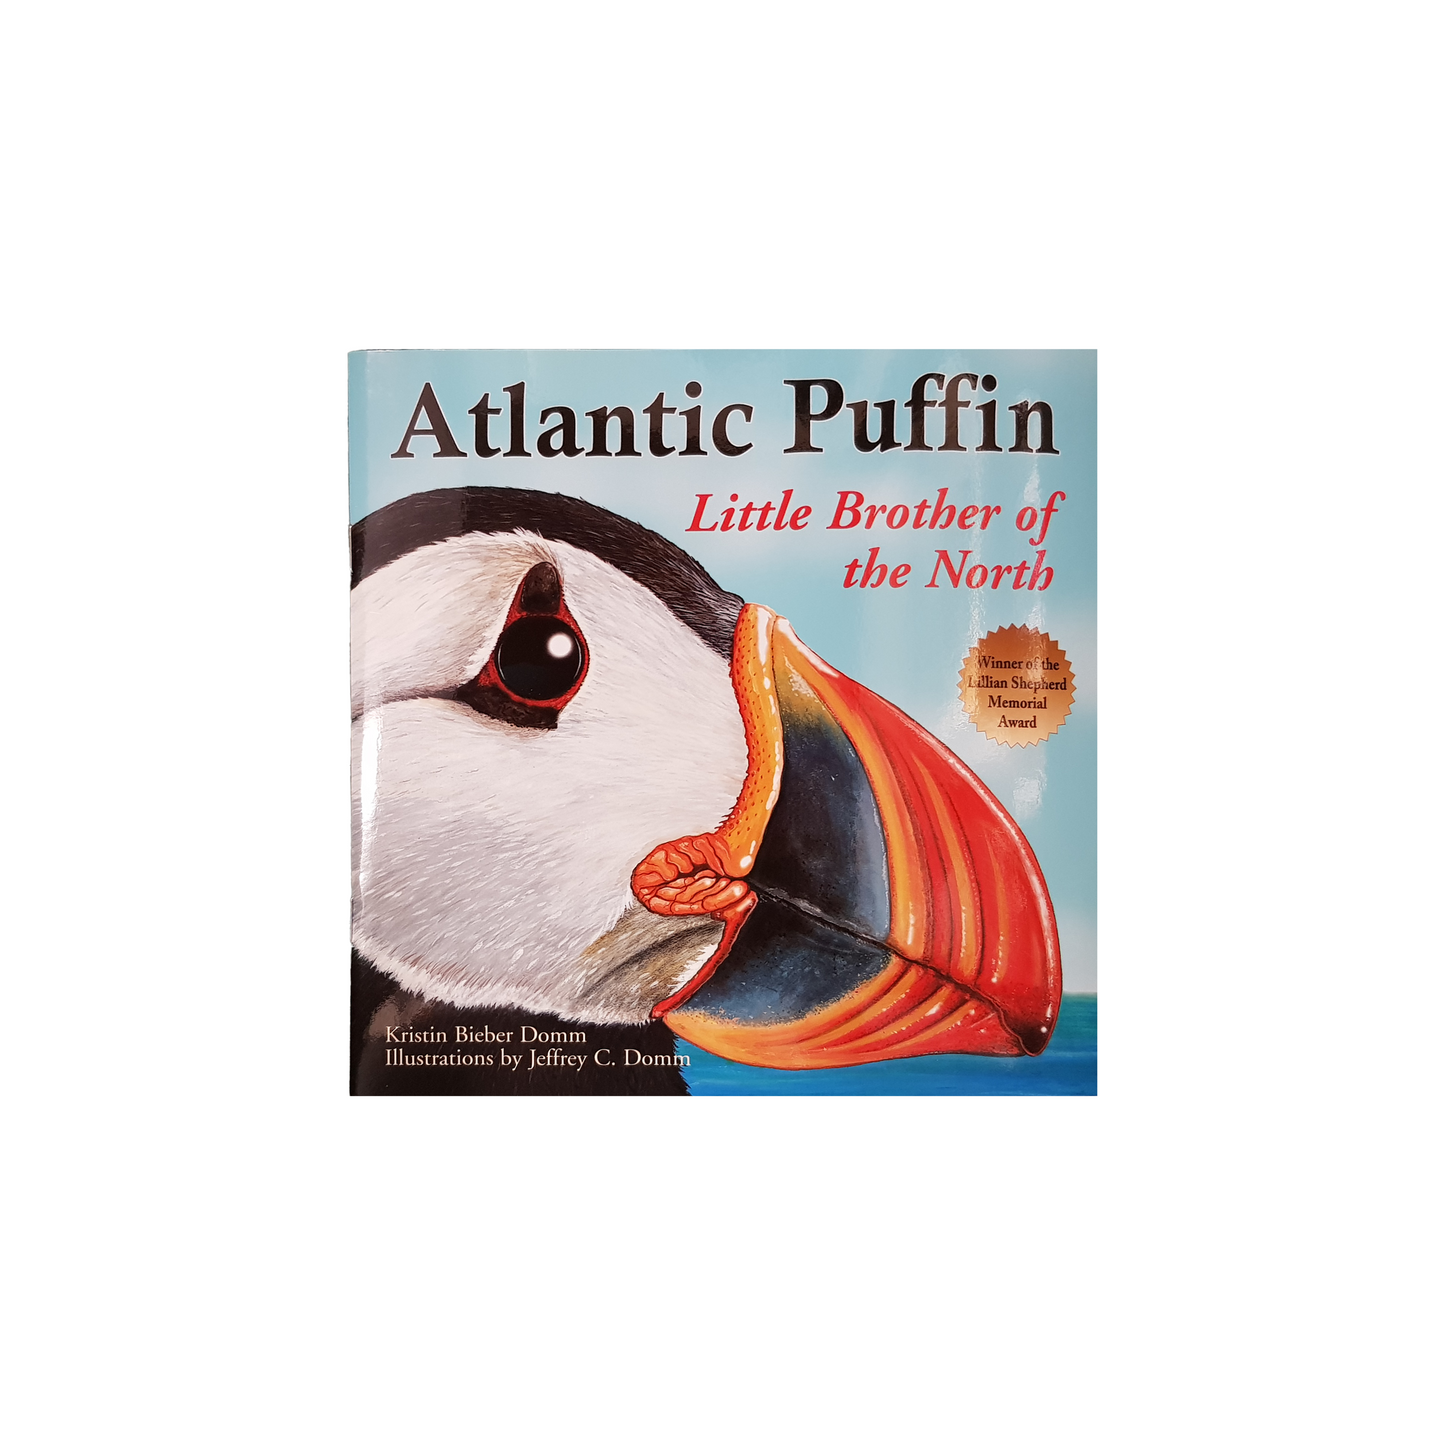 Atlantic Puffin: Little Brother Of The North